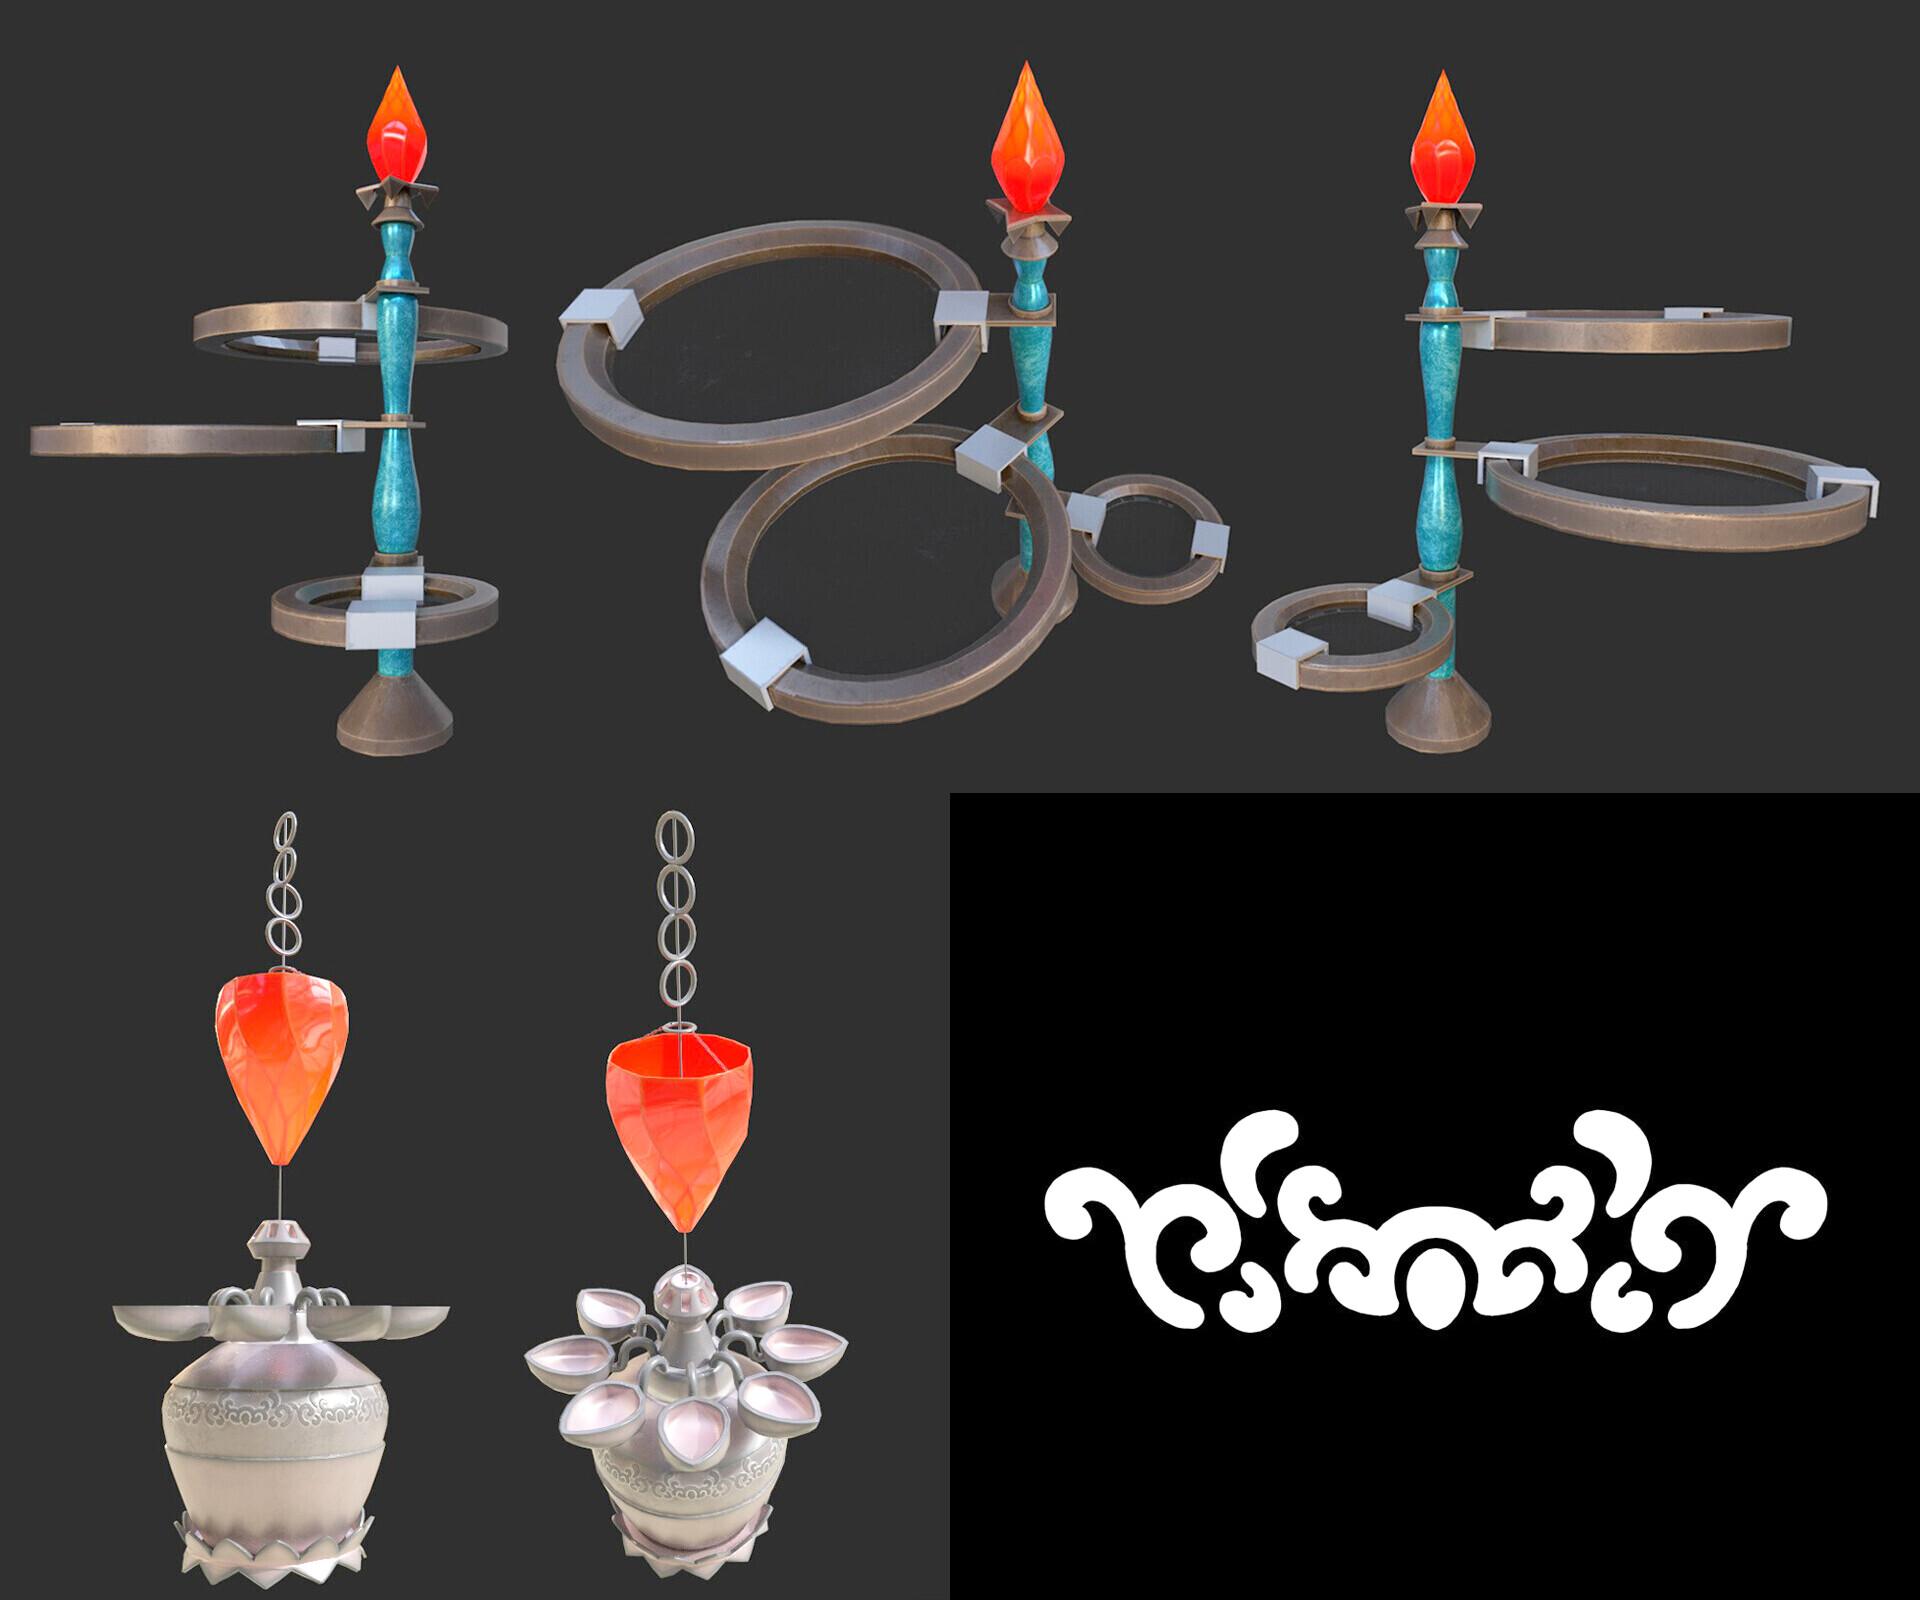 Props created by AET student Catherine Crawford for Ambrosia Princess Desk game asset